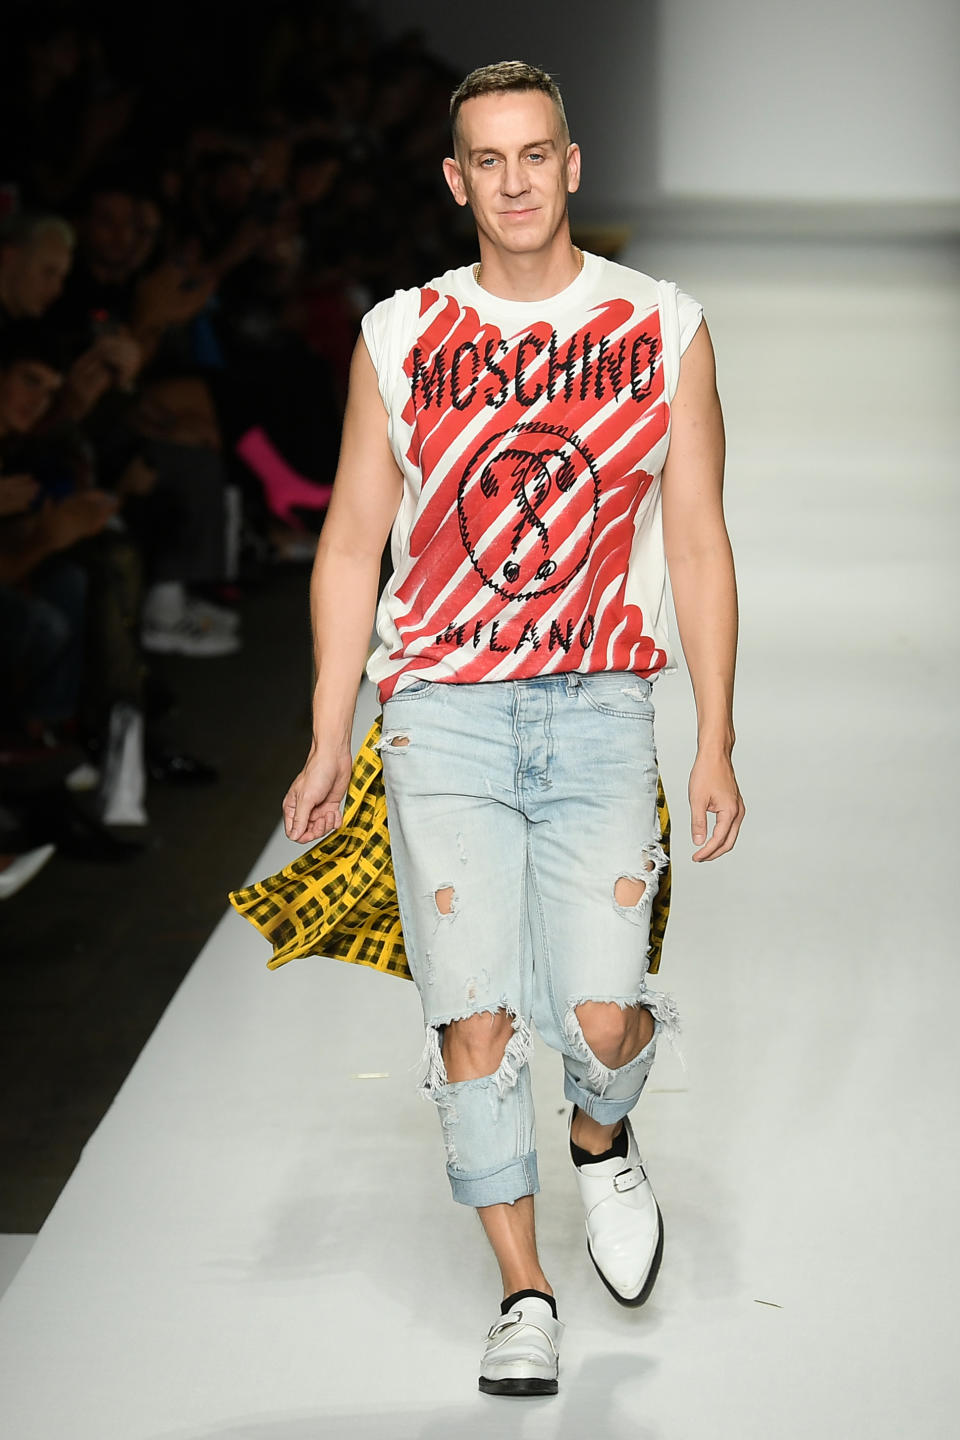 <p>US fashion designer Jeremy Scott acknowledges applause following the presentation of the Moschino fashion collection during the Women’s Spring/Summer 2019 fashion shows in Milan, on September 20, 2018. (Photo by Marco BERTORELLO / AFP) (Photo credit should read MARCO BERTORELLO/AFP via Getty Images)</p>